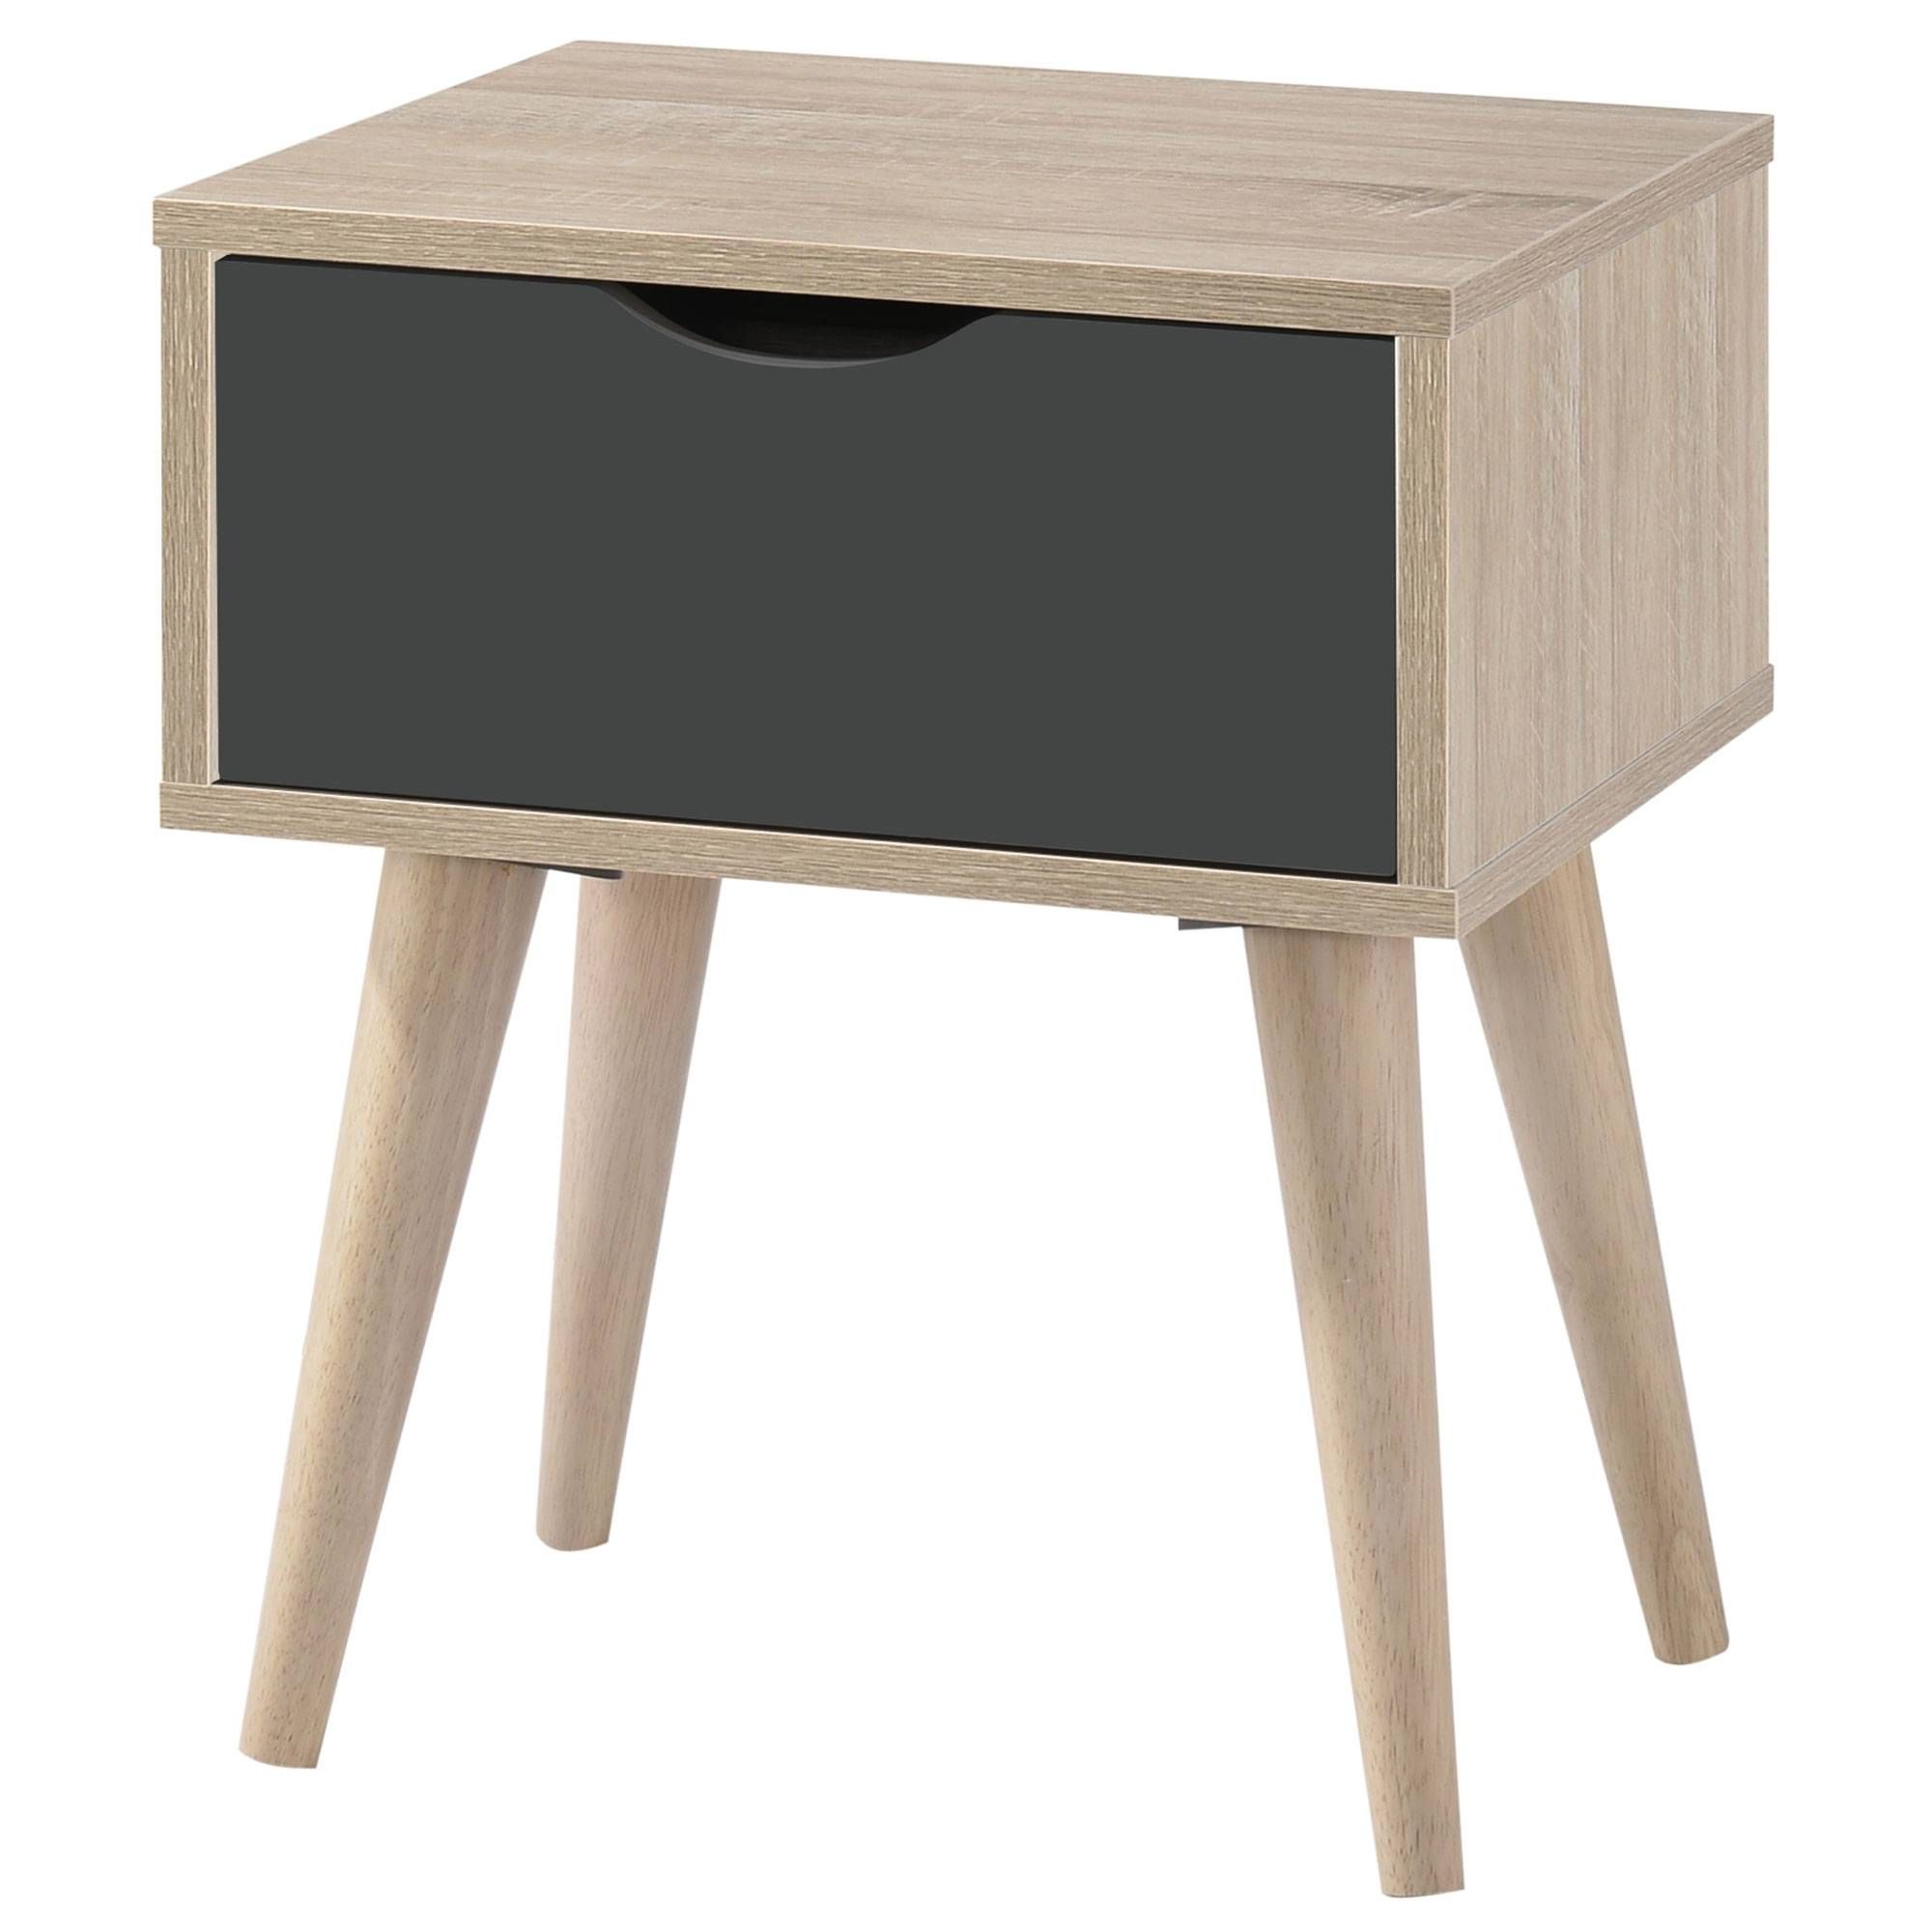 Modern lamp table boasting an oak effect finish.

Height: 49.6cm
Width: 36cm
Length: 40cm
                                                                                           A stylish addition to your home, this lamp table is part of the Scandi range. Composed of MDF, this modern piece boasts an oak effect finish and comes complete with a grey drawer. It is perfect for use in bedrooms as a bedside table, or as a side table in living rooms and dining rooms.